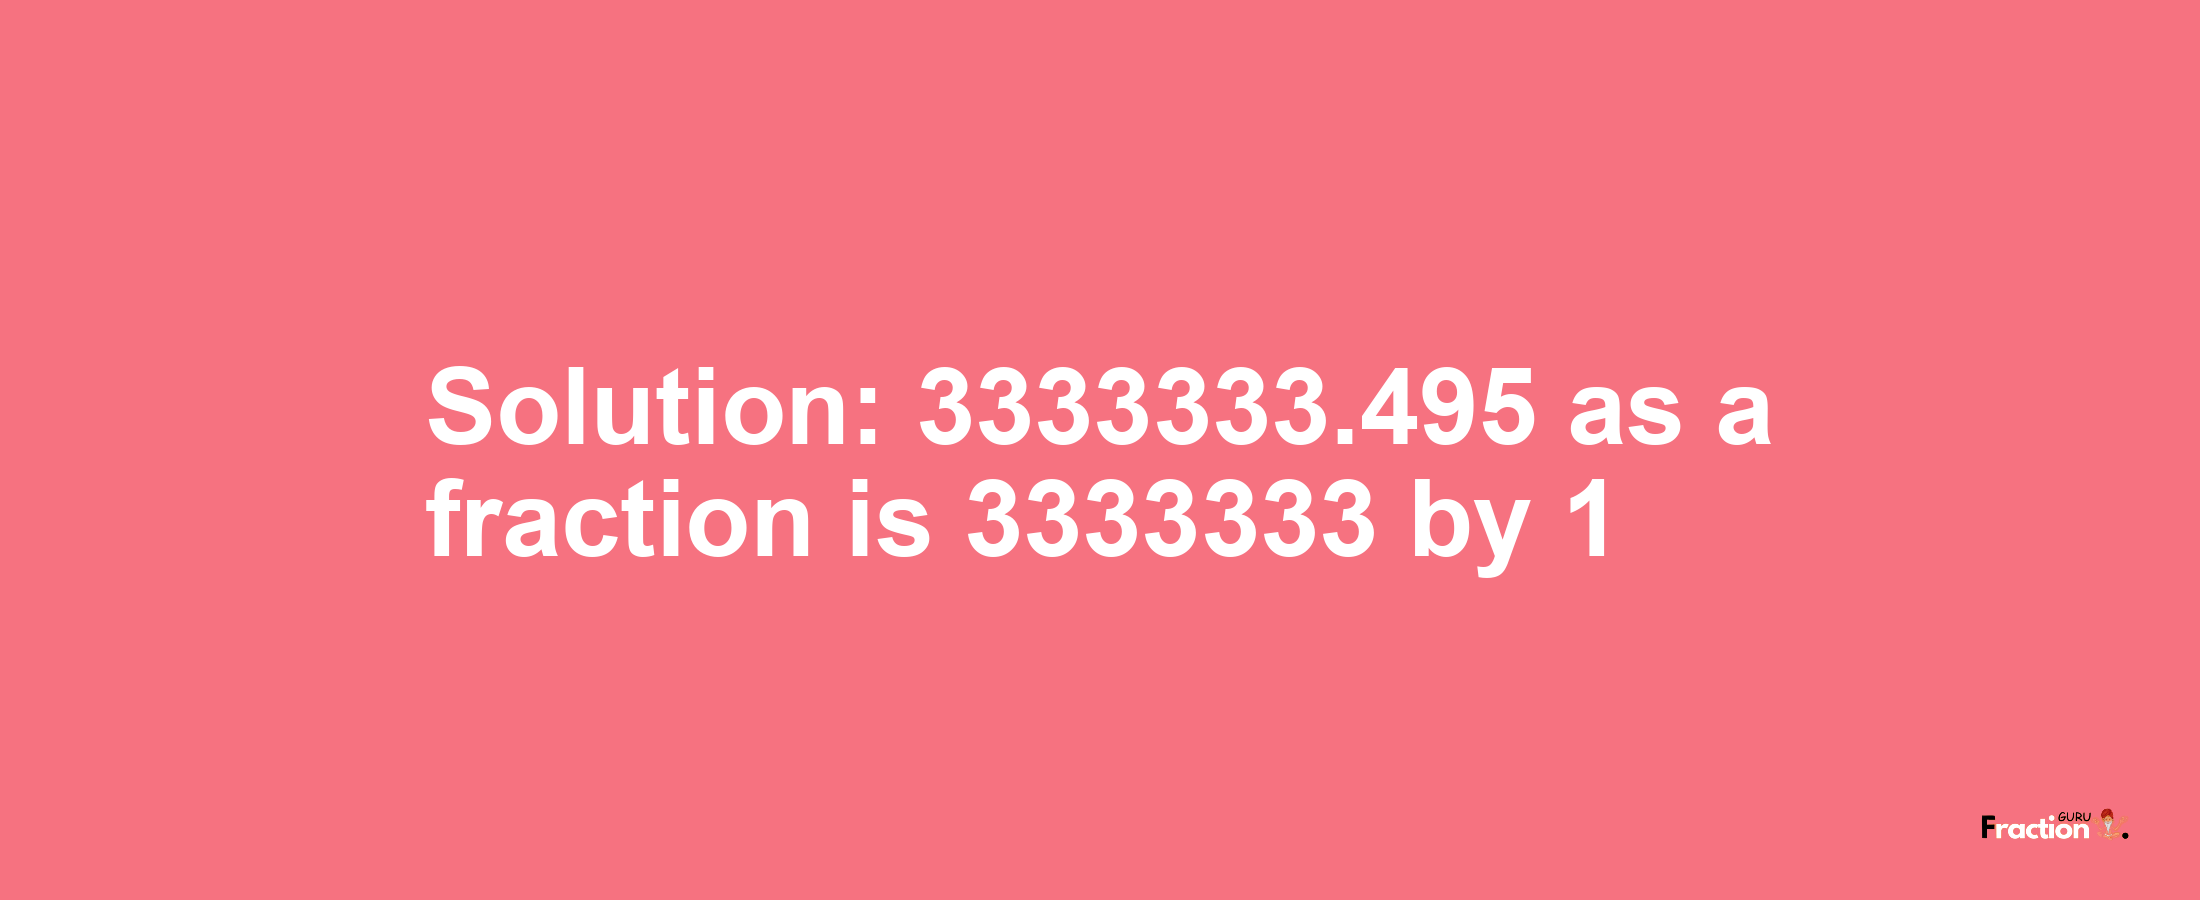 Solution:3333333.495 as a fraction is 3333333/1